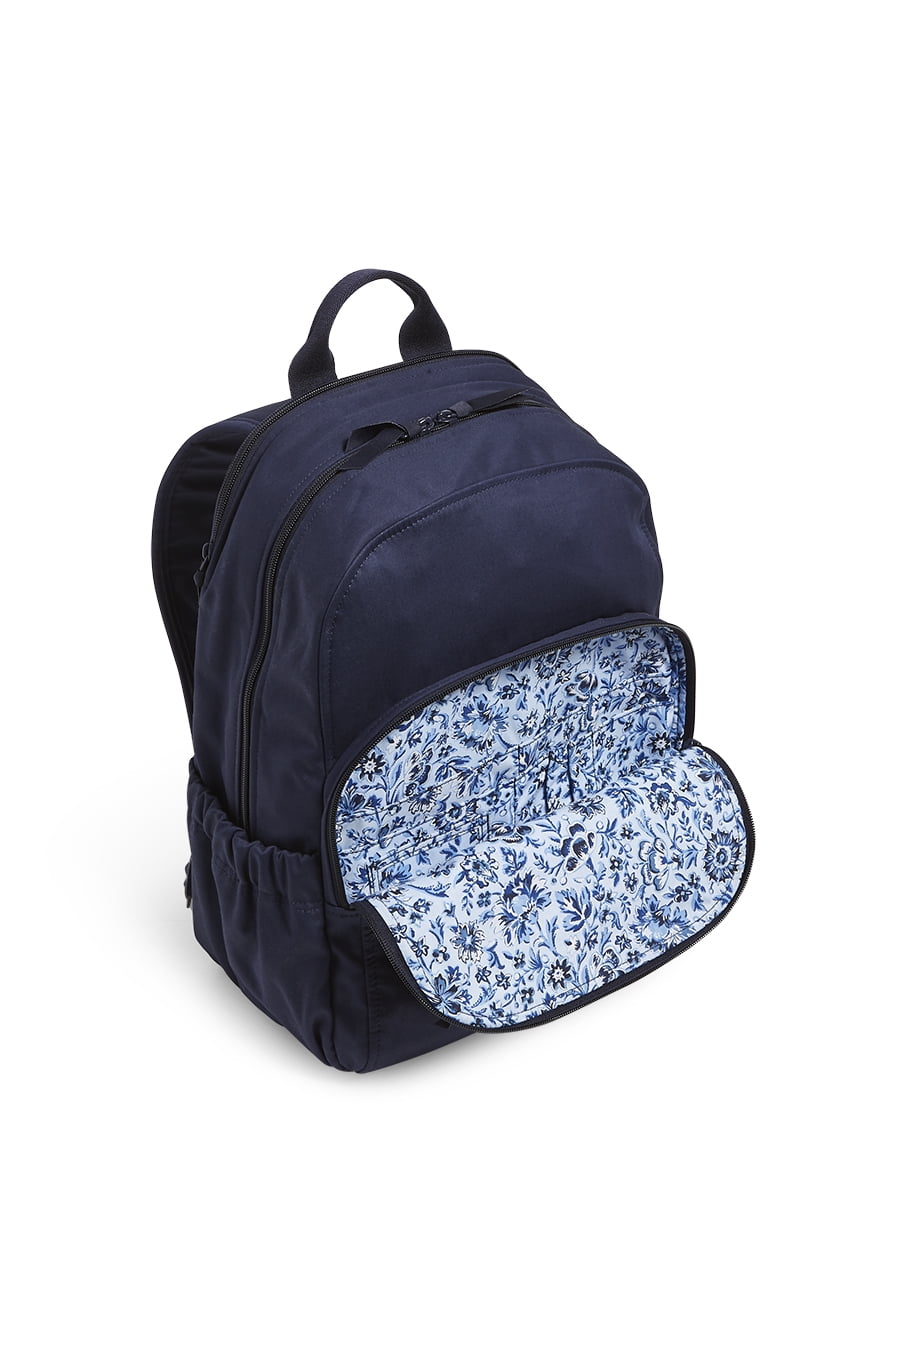 Vera Bradley Women's Recycled Cotton Campus Backpack Classic Navy